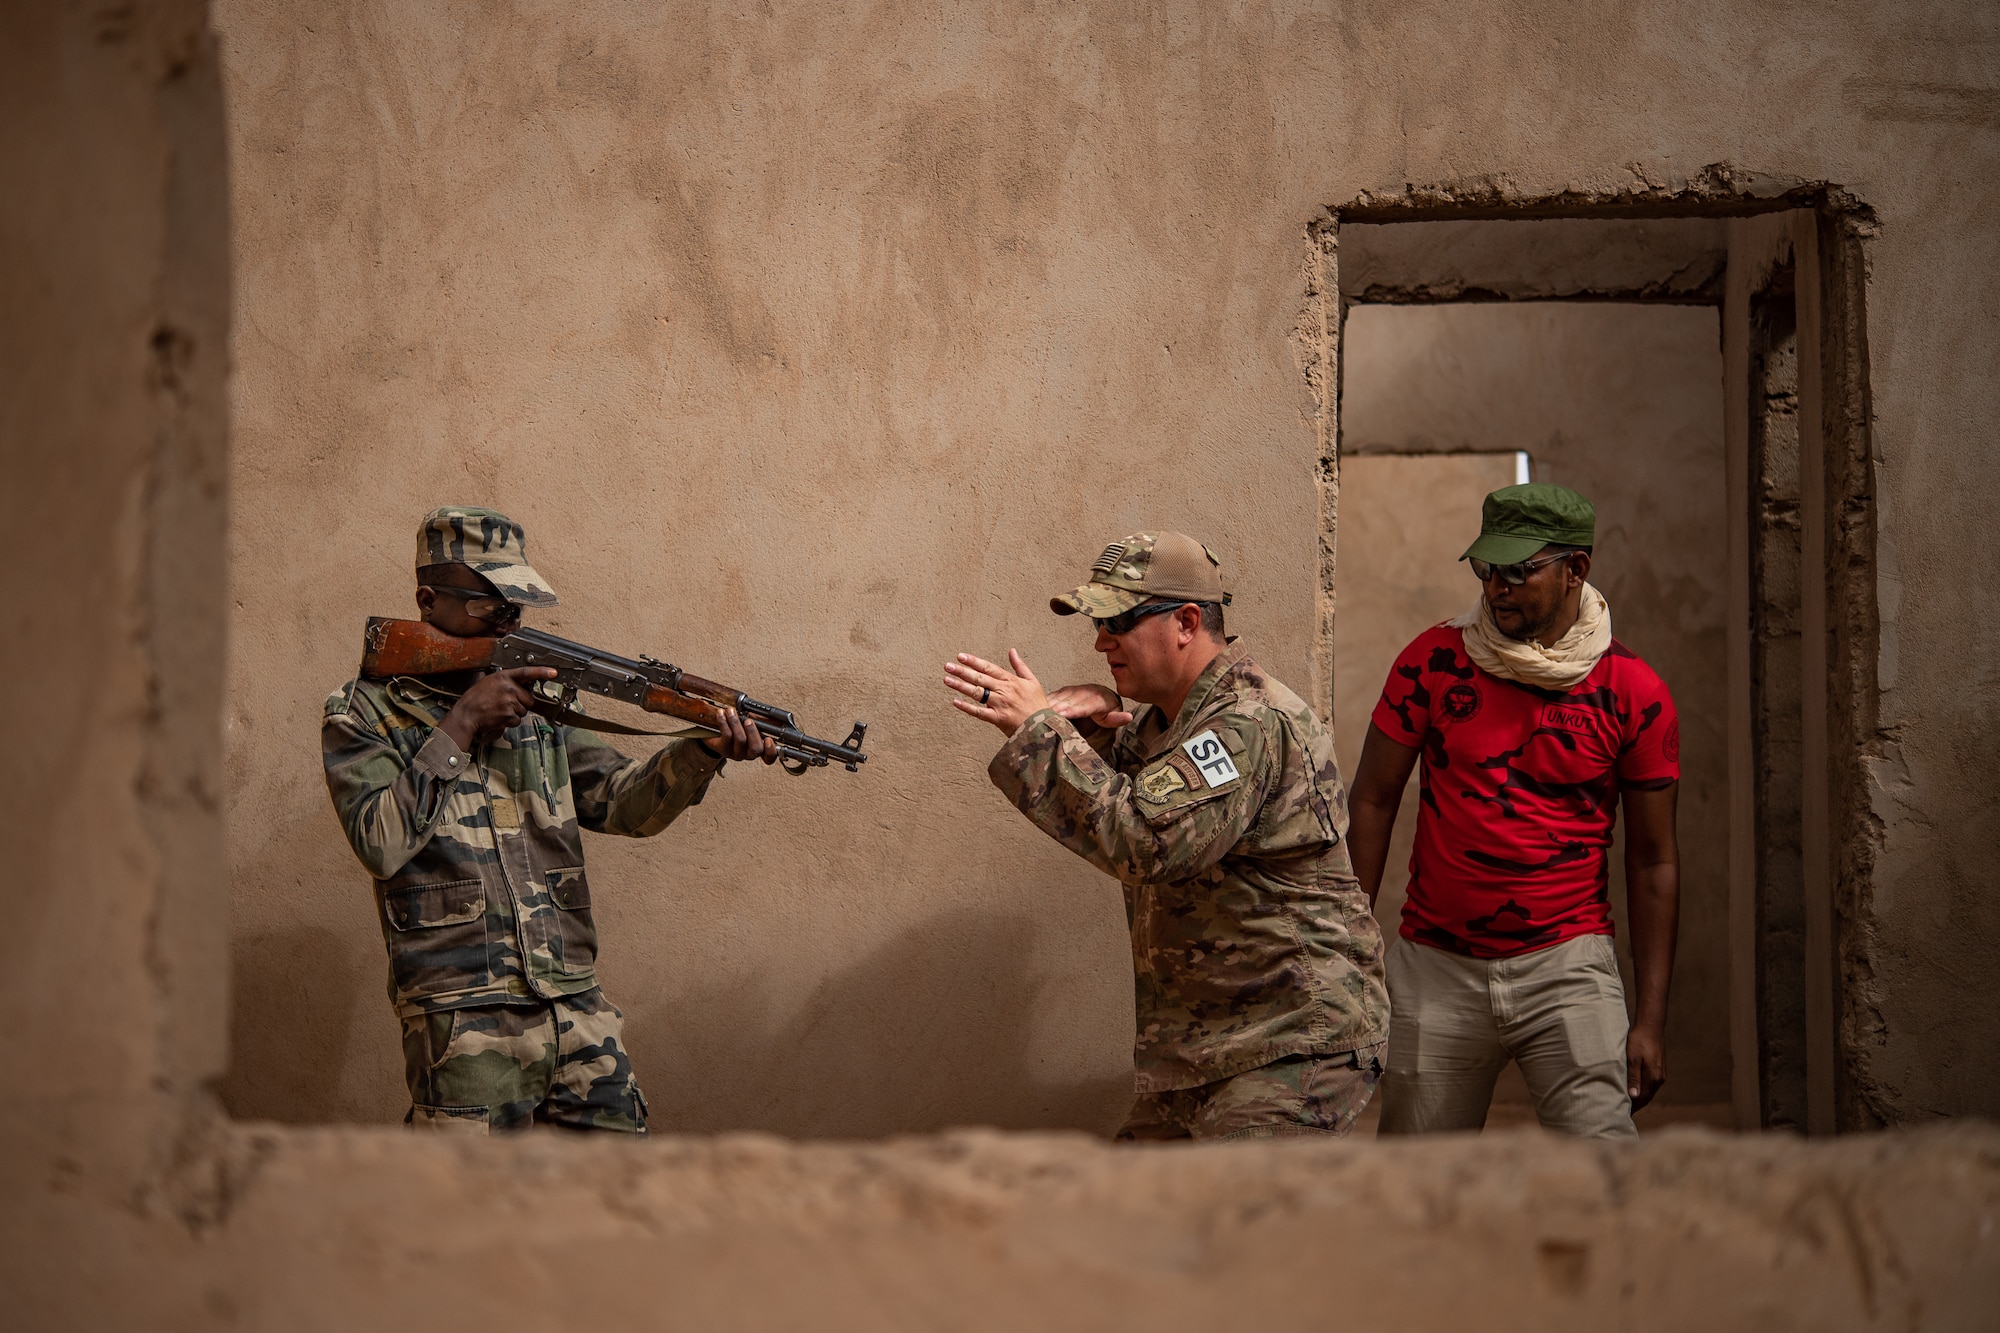 U.S. Air Force Tech. Sgt. Tyler Torr, 409th Expeditionary Security Forces Squadron air advisor, center, gives instructions to a Niger Armed Forces (French language: Forces Armées Nigeriennes) member while Salah, Combined Defense Operations Center interpreter, translates the instructions during a training exercise at the FAN compound on Nigerien Air Base 201 in Agadez, Niger, July 10, 2019. The training enables both forces to improve interoperability, and also helps the Nigeriens to protect themselves during deployments. (U.S. Air Force photo by Staff Sgt. Devin Boyer)